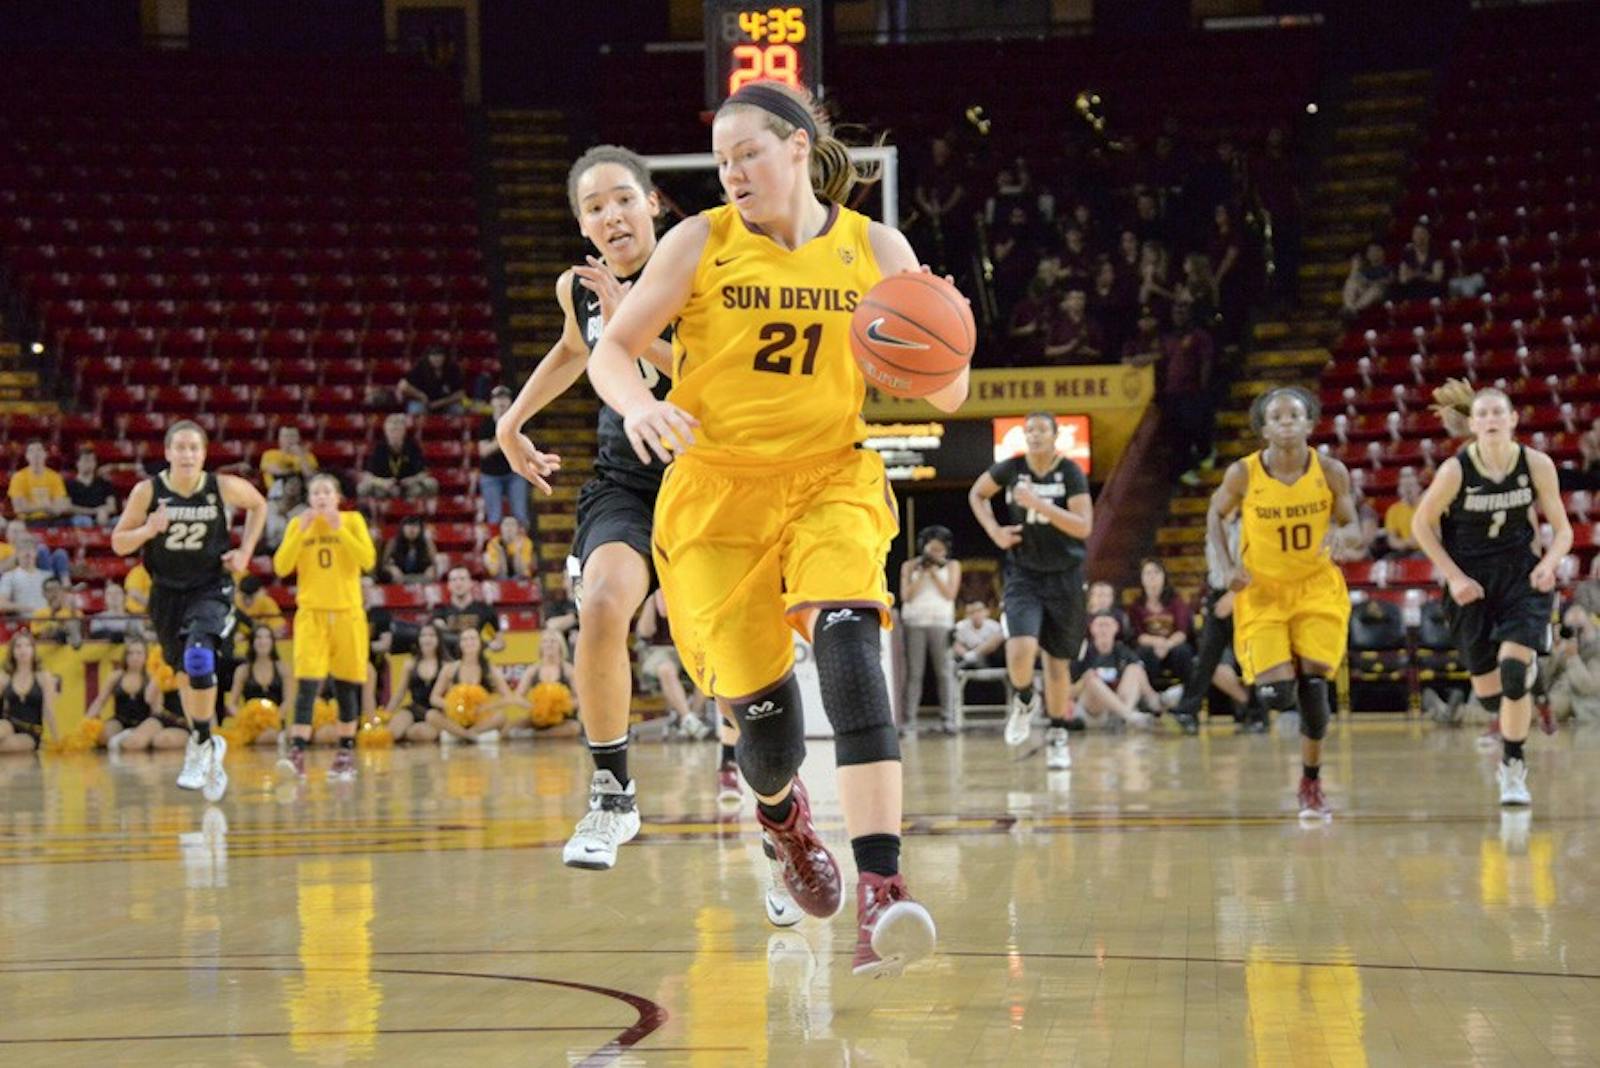 Pac12 women's basketball tournament will likely come down to four